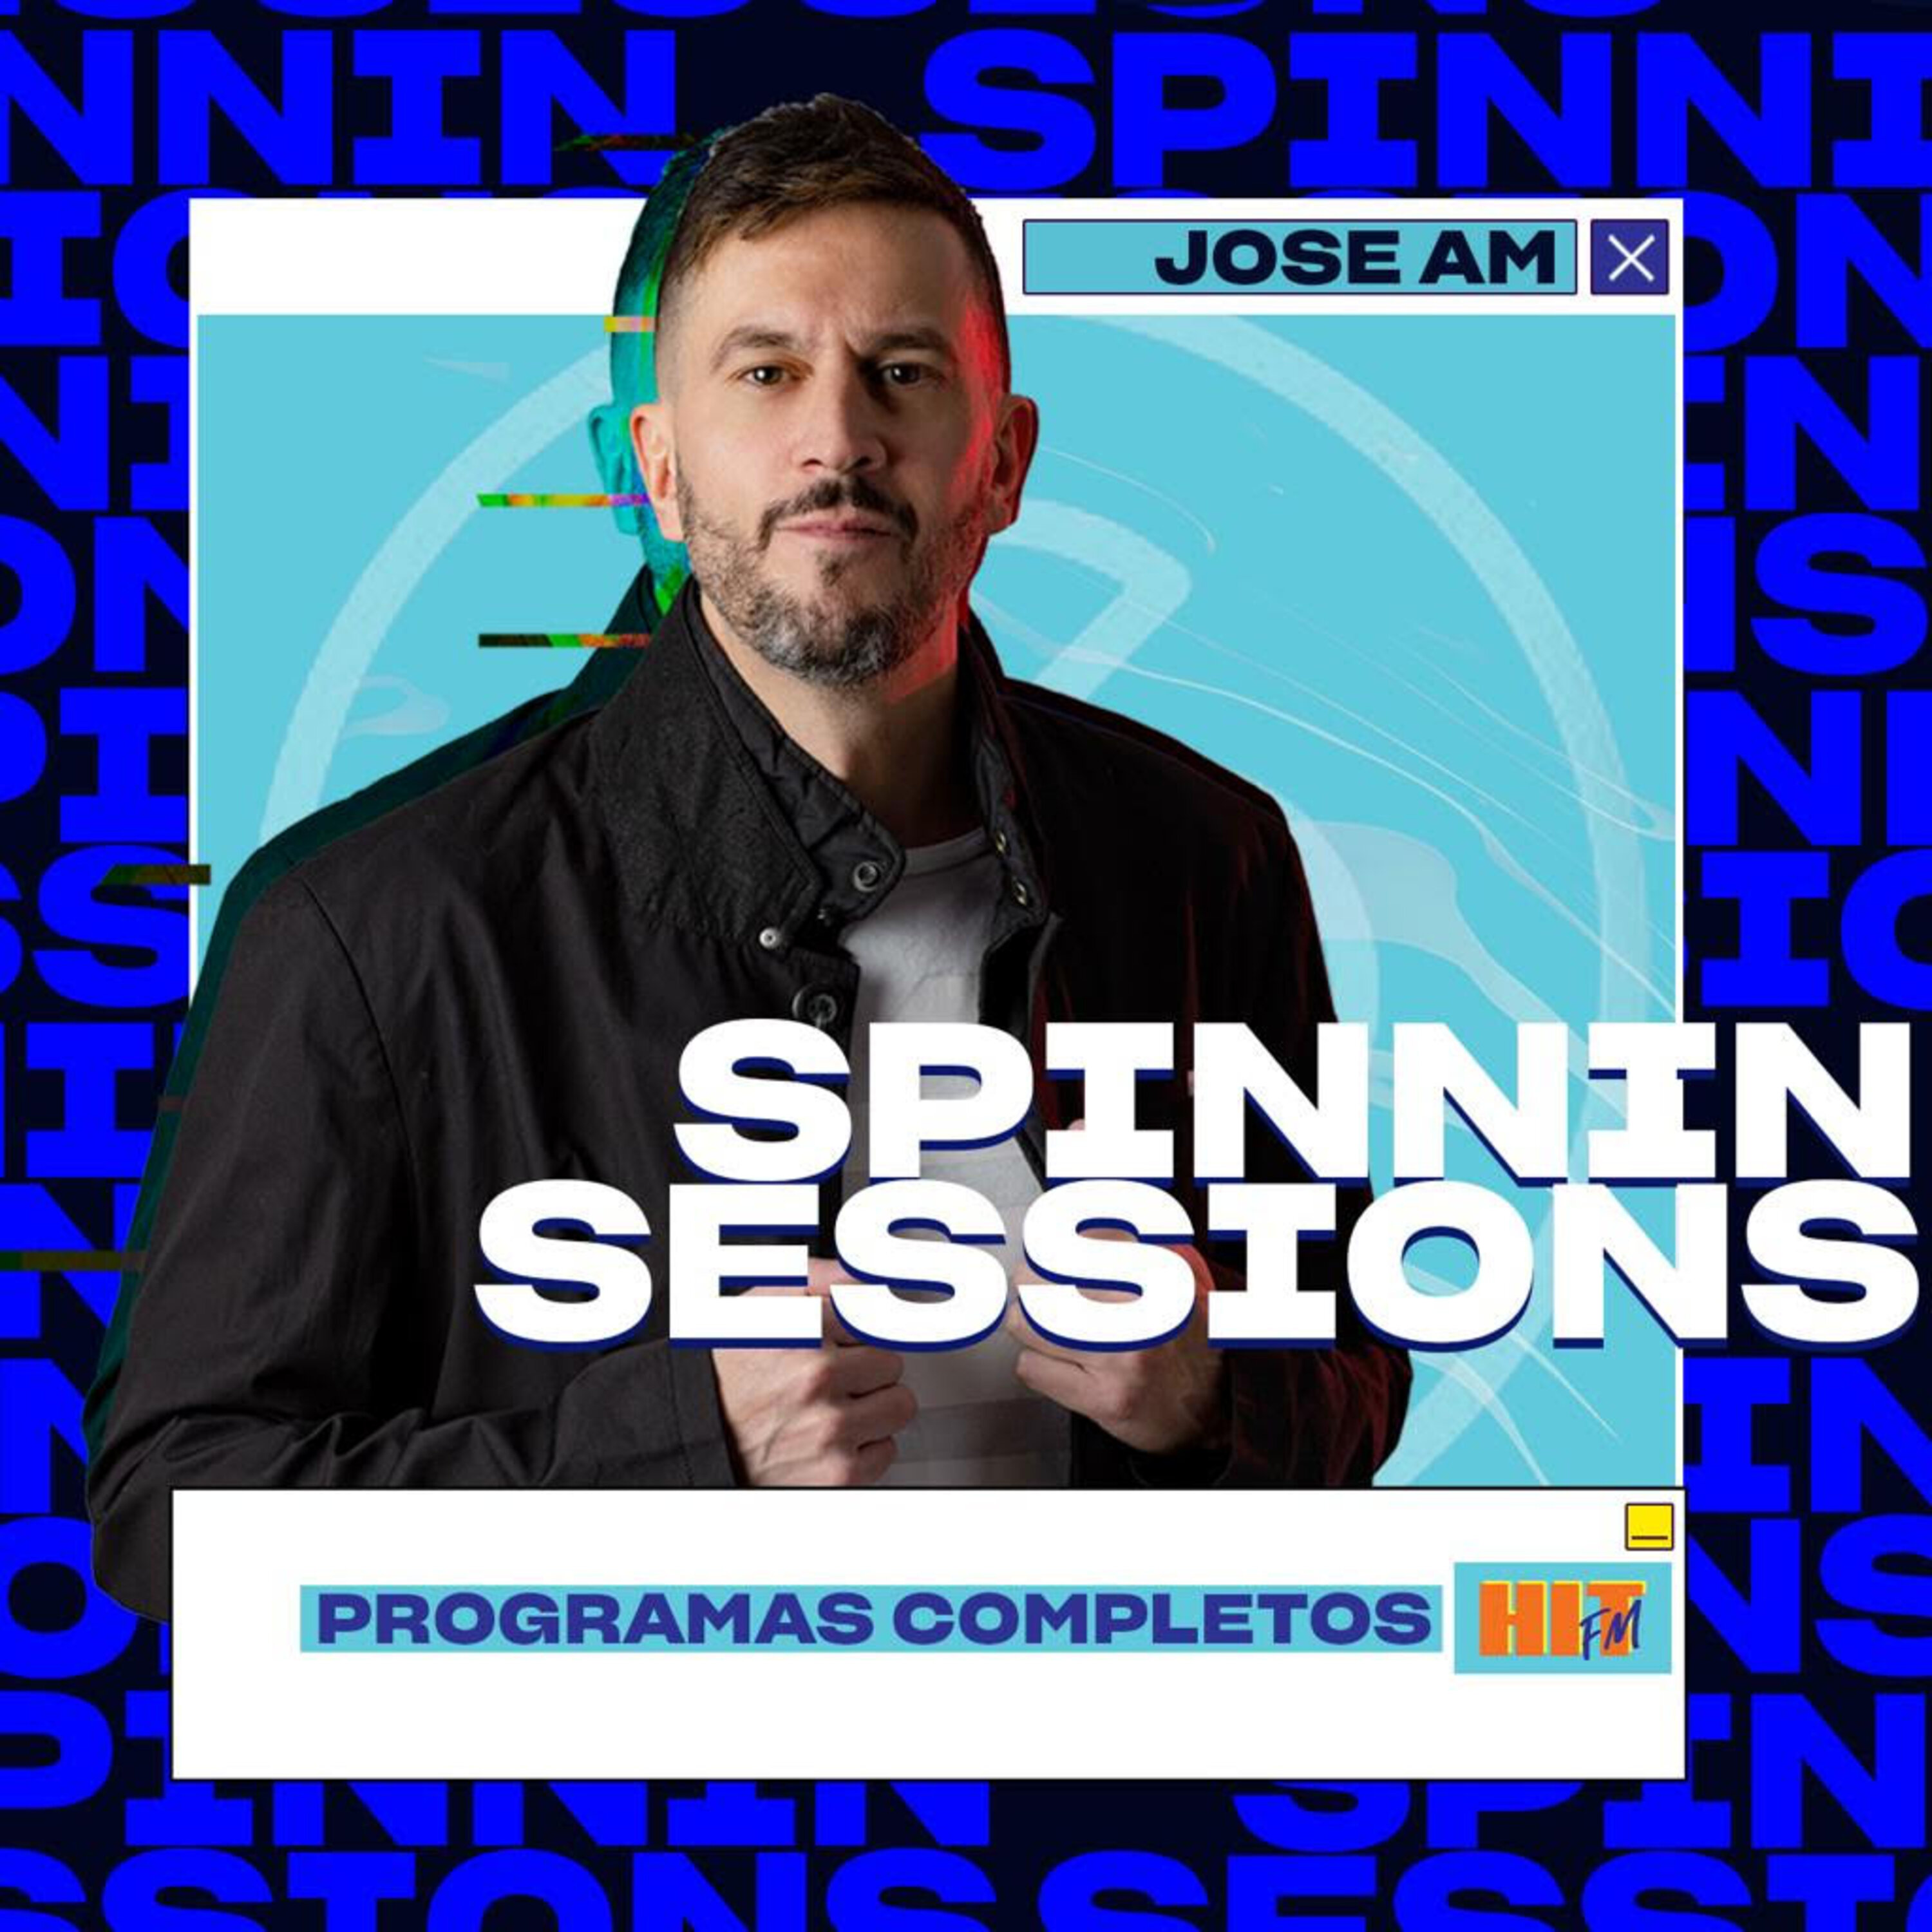 Spinnin Sessions con Jose AM (24/01/2022)